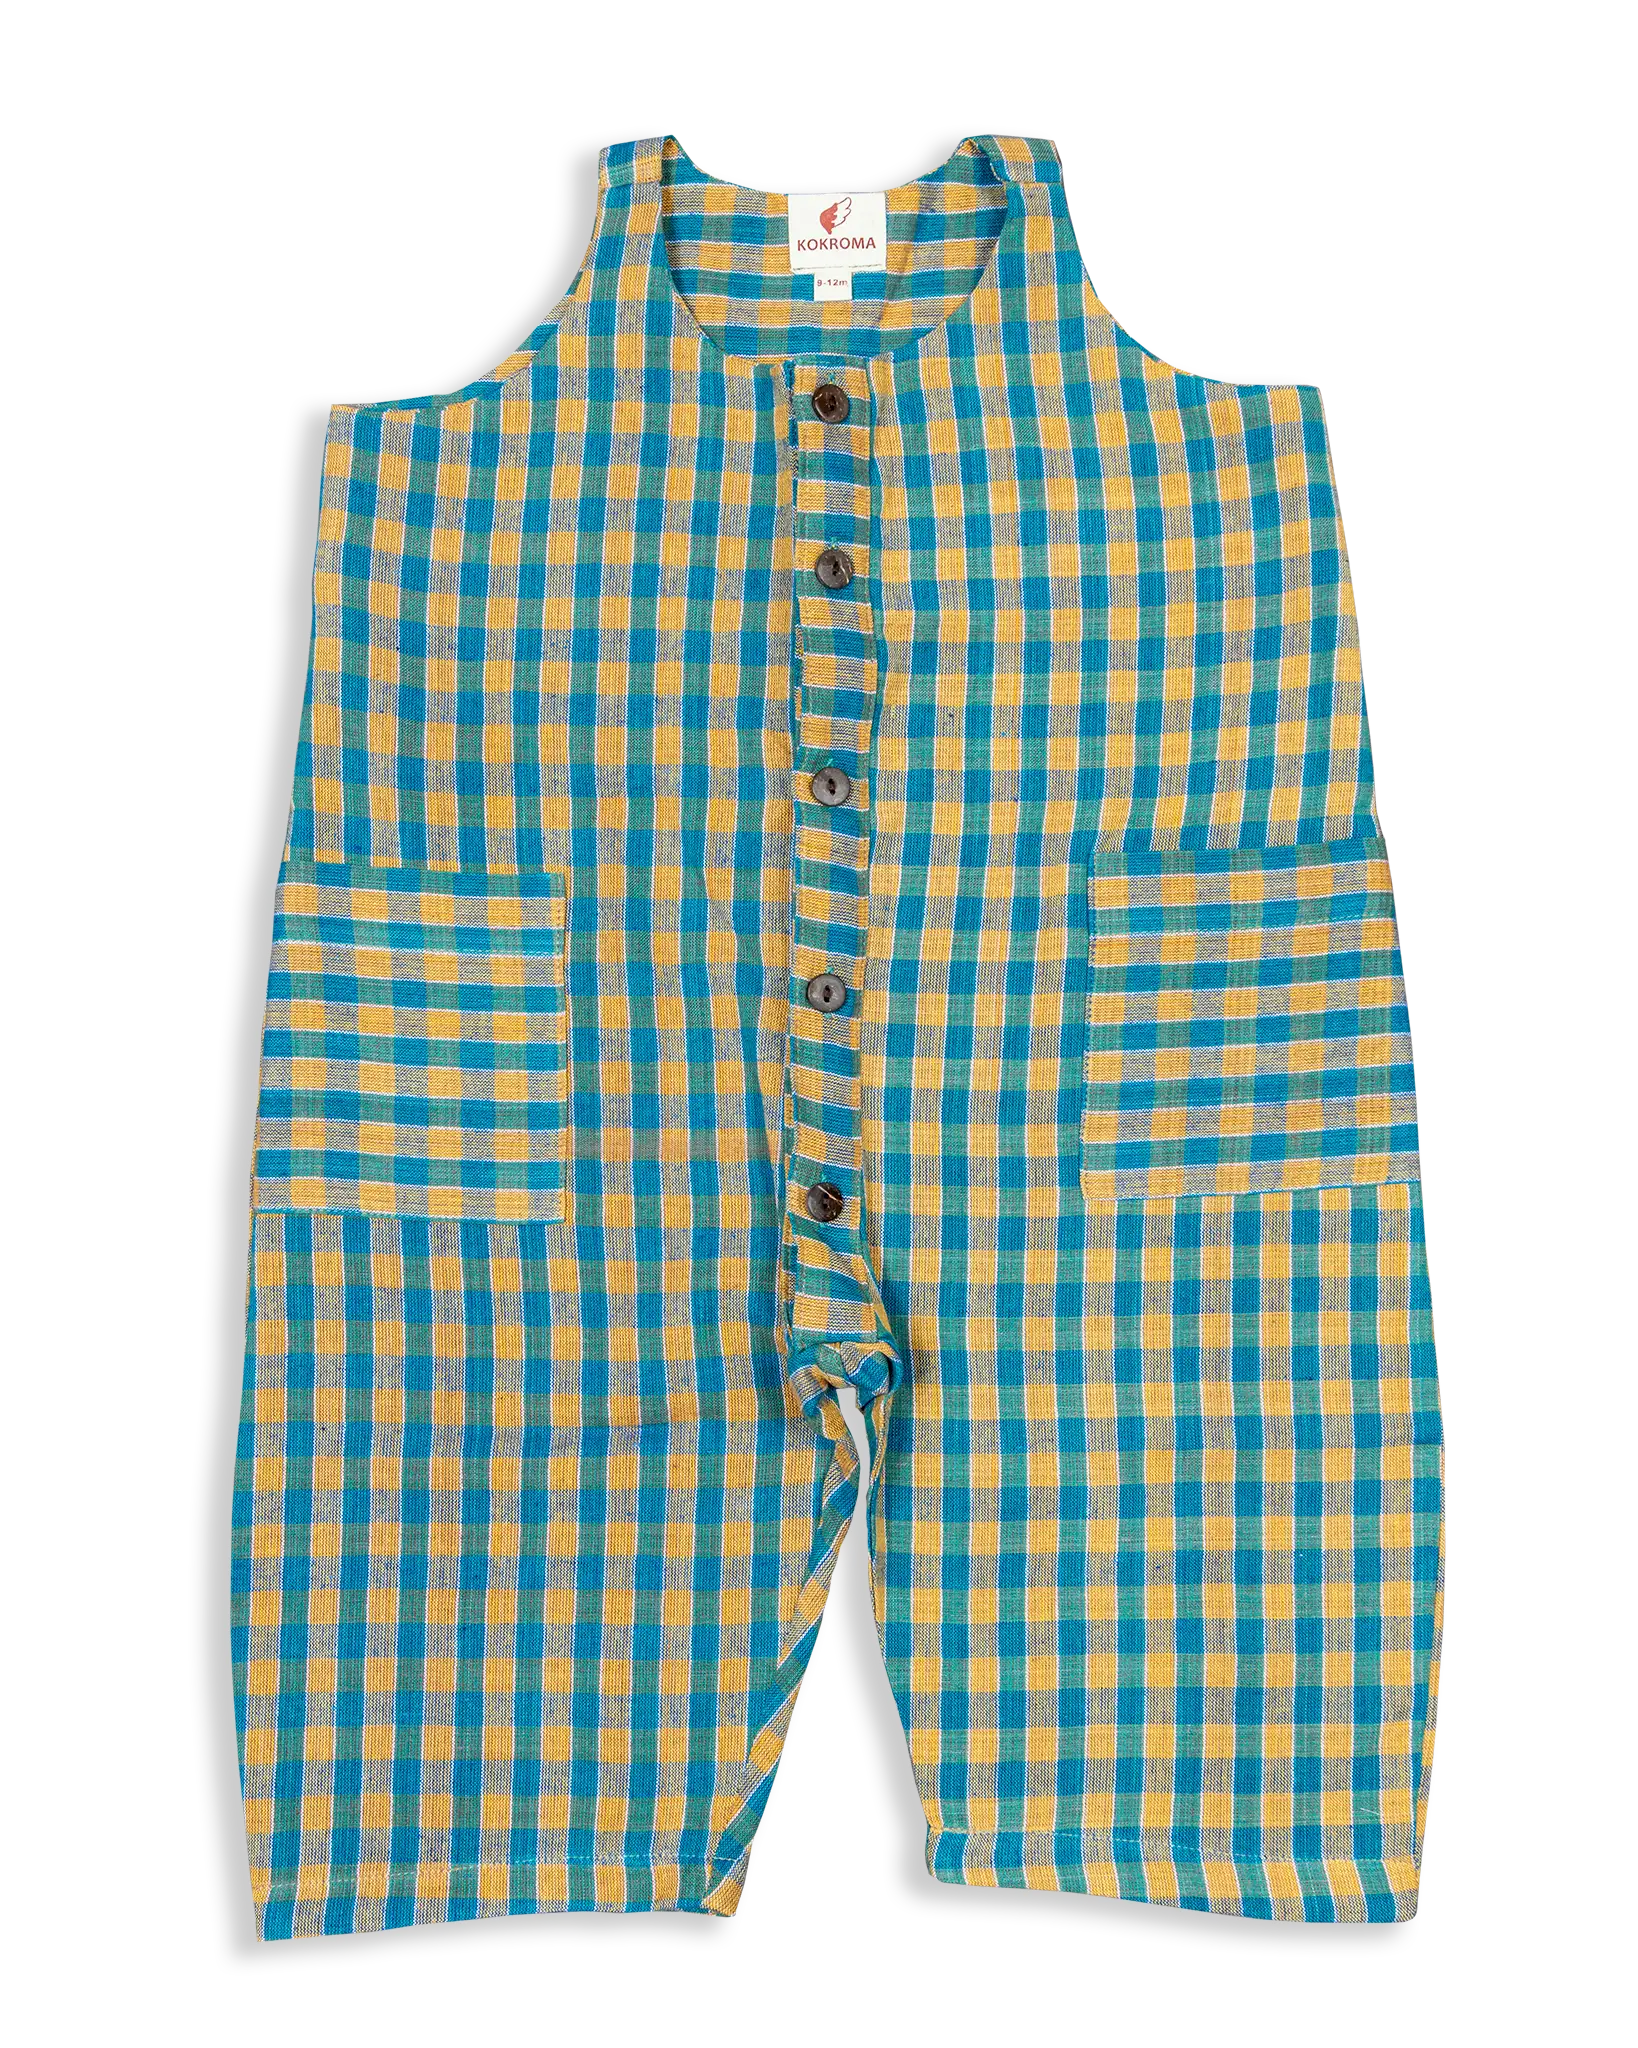 Children love soft, breathable cotton clothes! These Jumpsuit with buttons are made from woven fabrics which are unisex, simple yet cool to wear this summer. Our textiles are woven by inmates here in Nepal that provide an opportunity to generate income and support families back home.